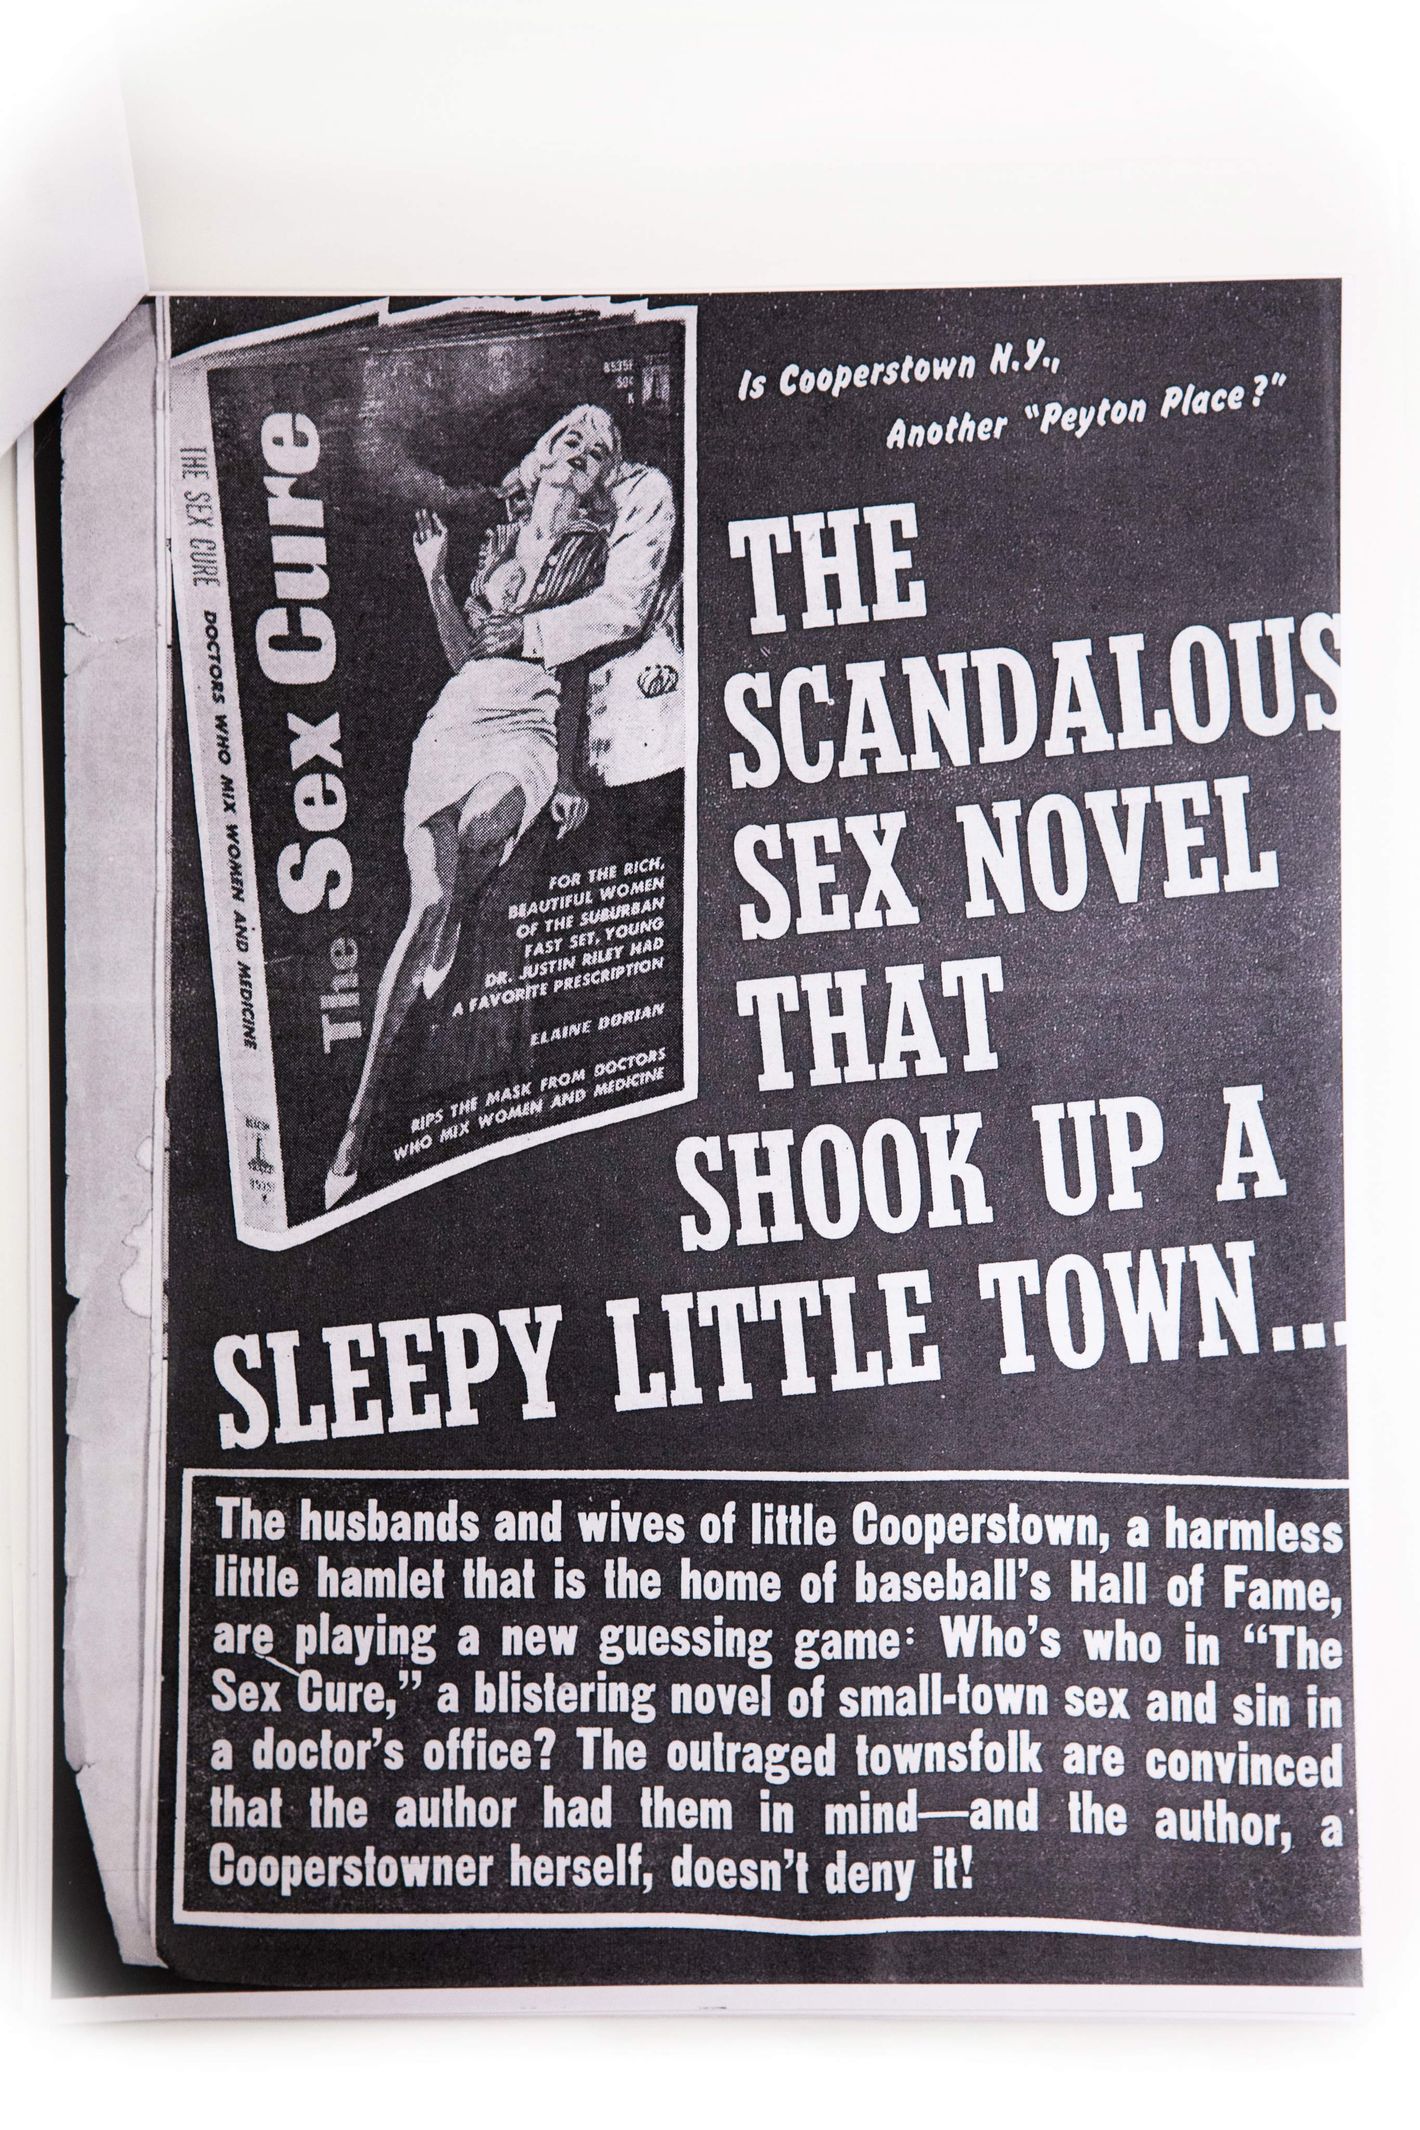 Sex, Lies, and Cooperstown How a Pulp Novel Started a Riot in Americas Baseball Mecca pic pic